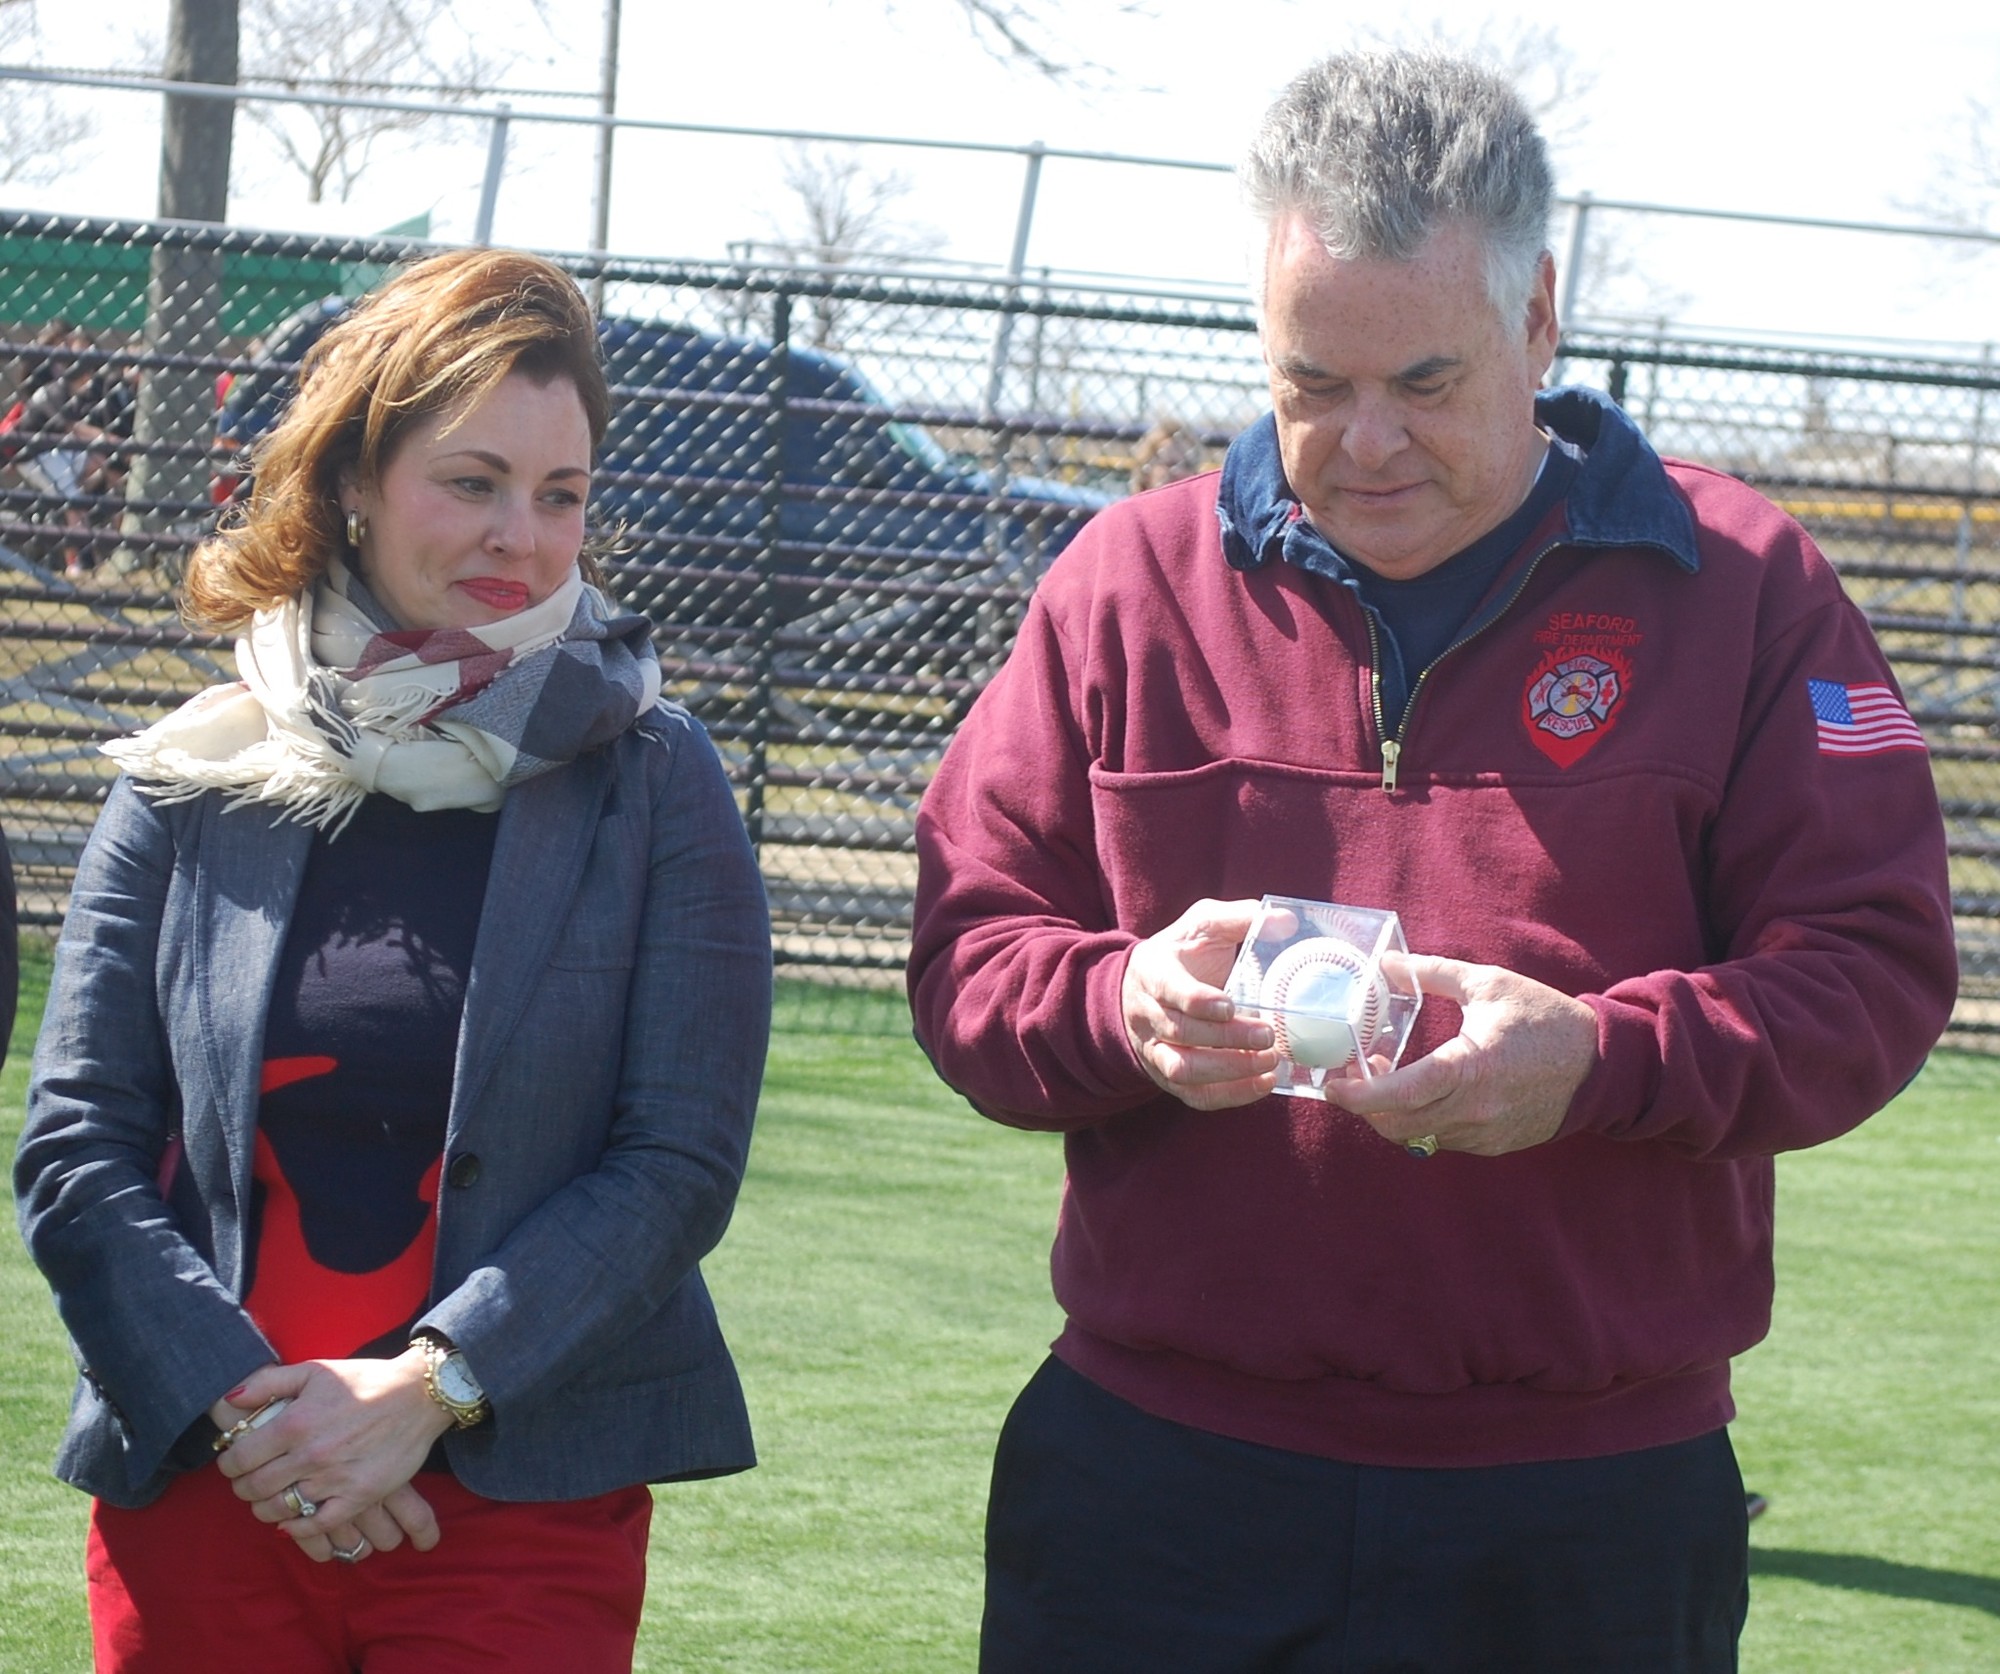 Congressman Peter King, of Seaford, and his daughter, town Councilwoman Erin King Sweeney, were on hand.